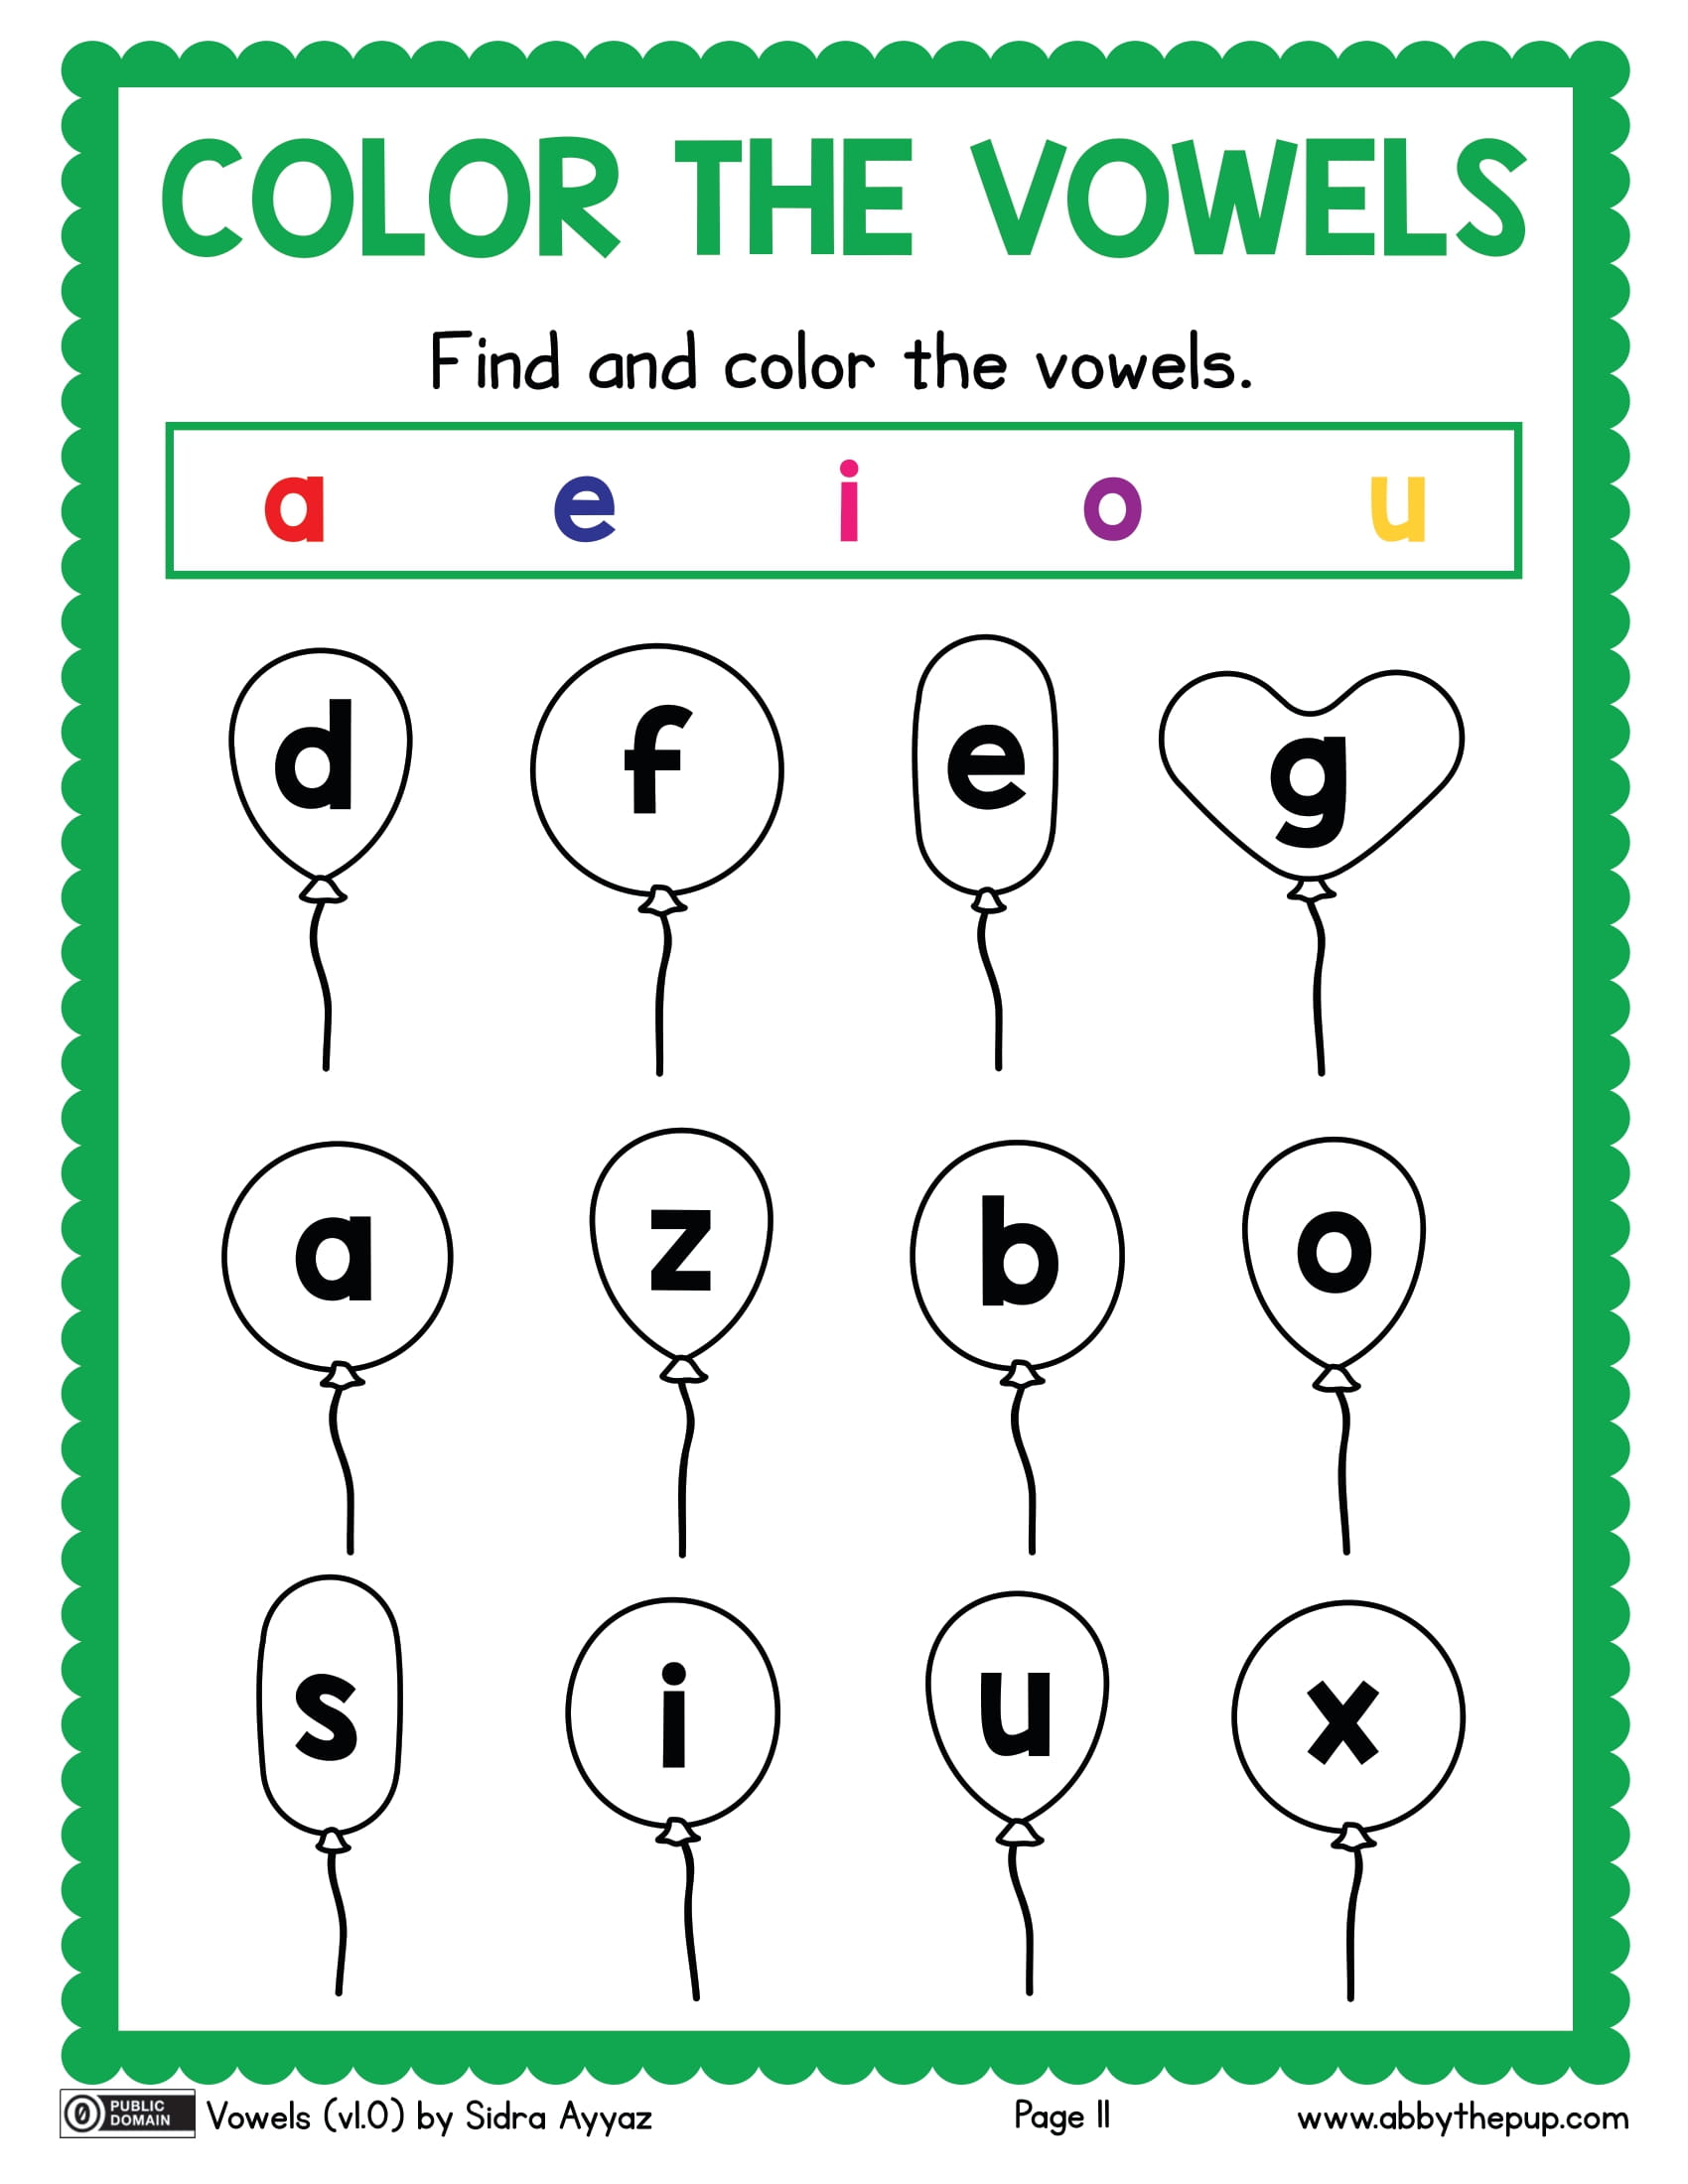 Color the vowels free printable puzzle games